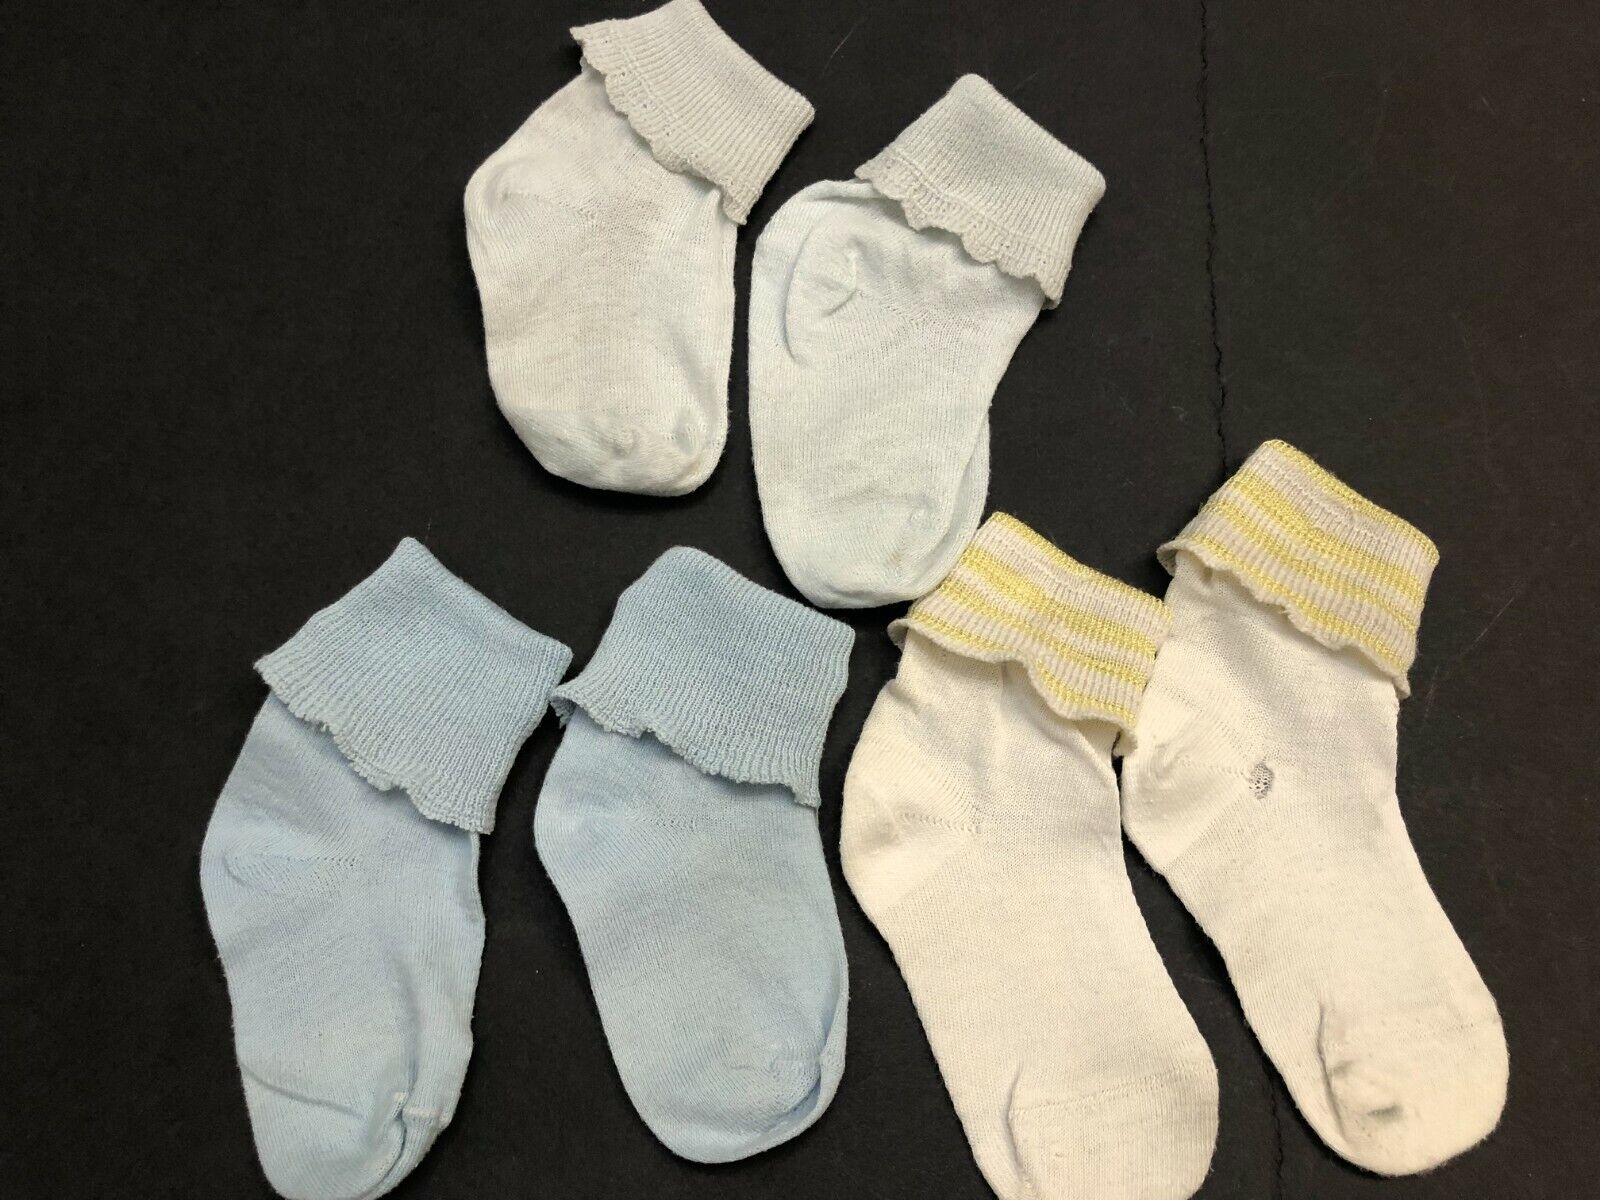 3 Pair Of 1960's To 70's Vintage  Baby Socks Size 0-3 Months